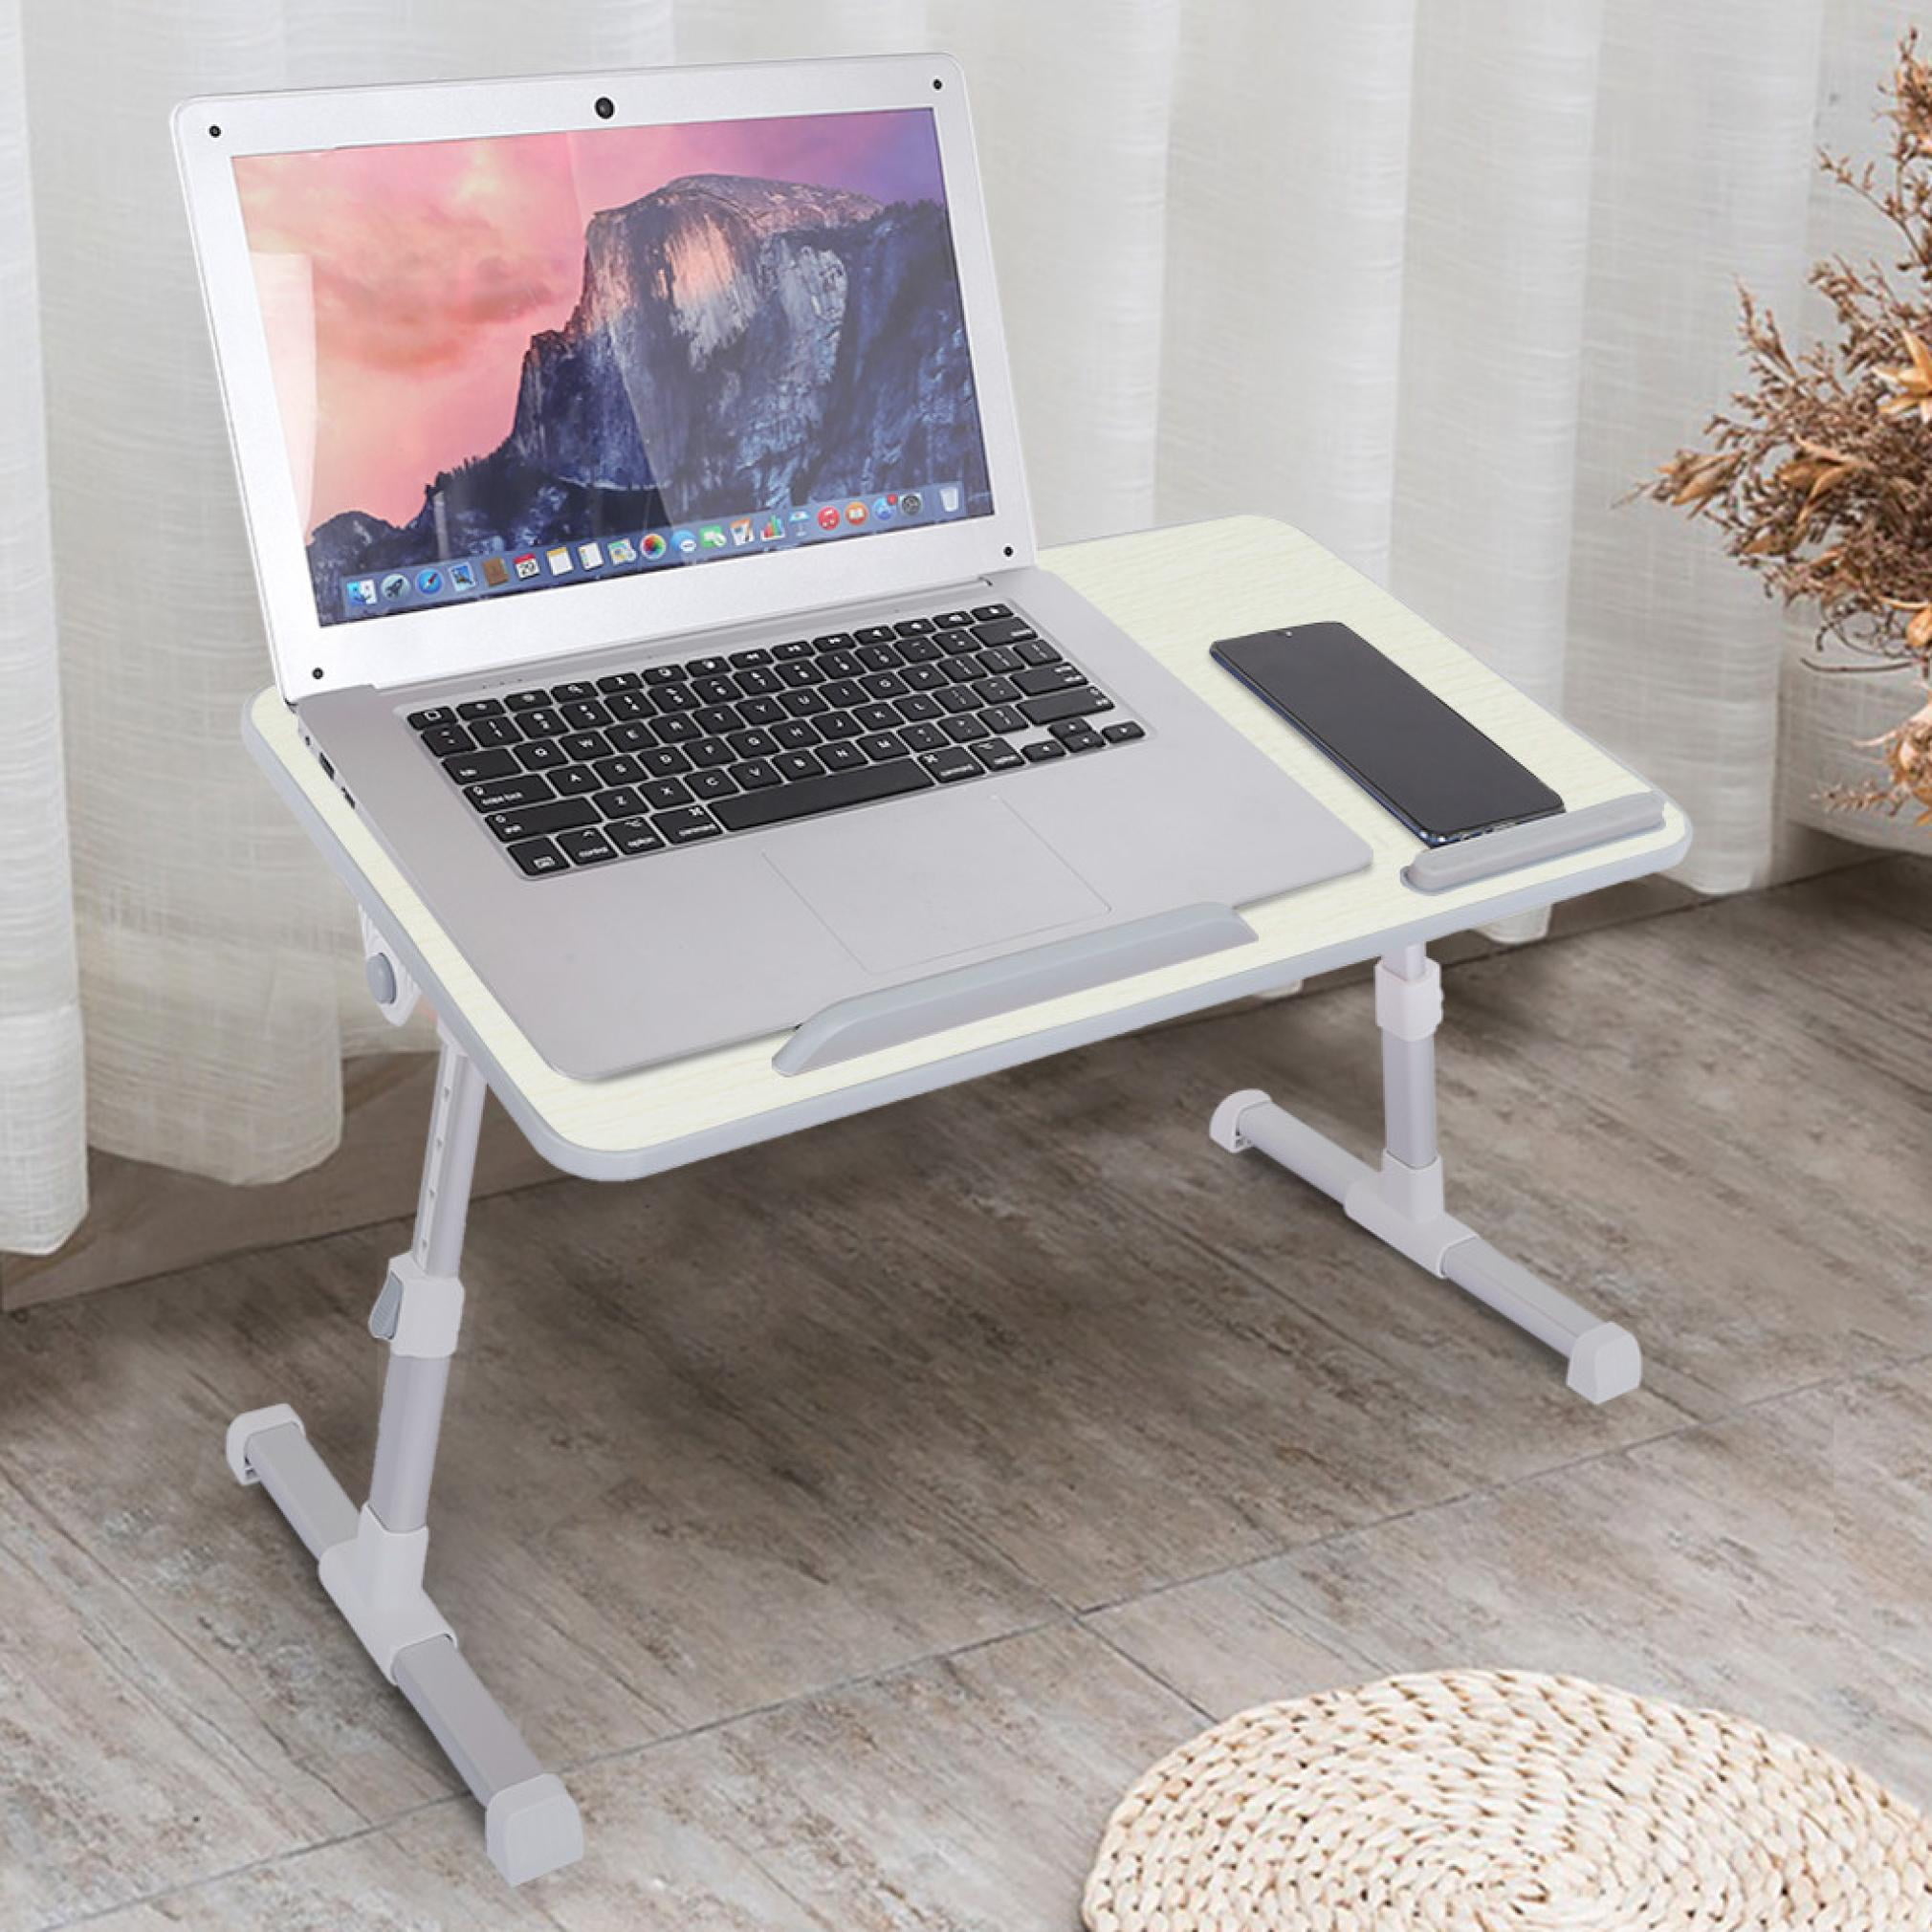 Adjustable Portable Laptop Stand Lazy Lap Sofa Bed PC Notebook Desk Table Study 